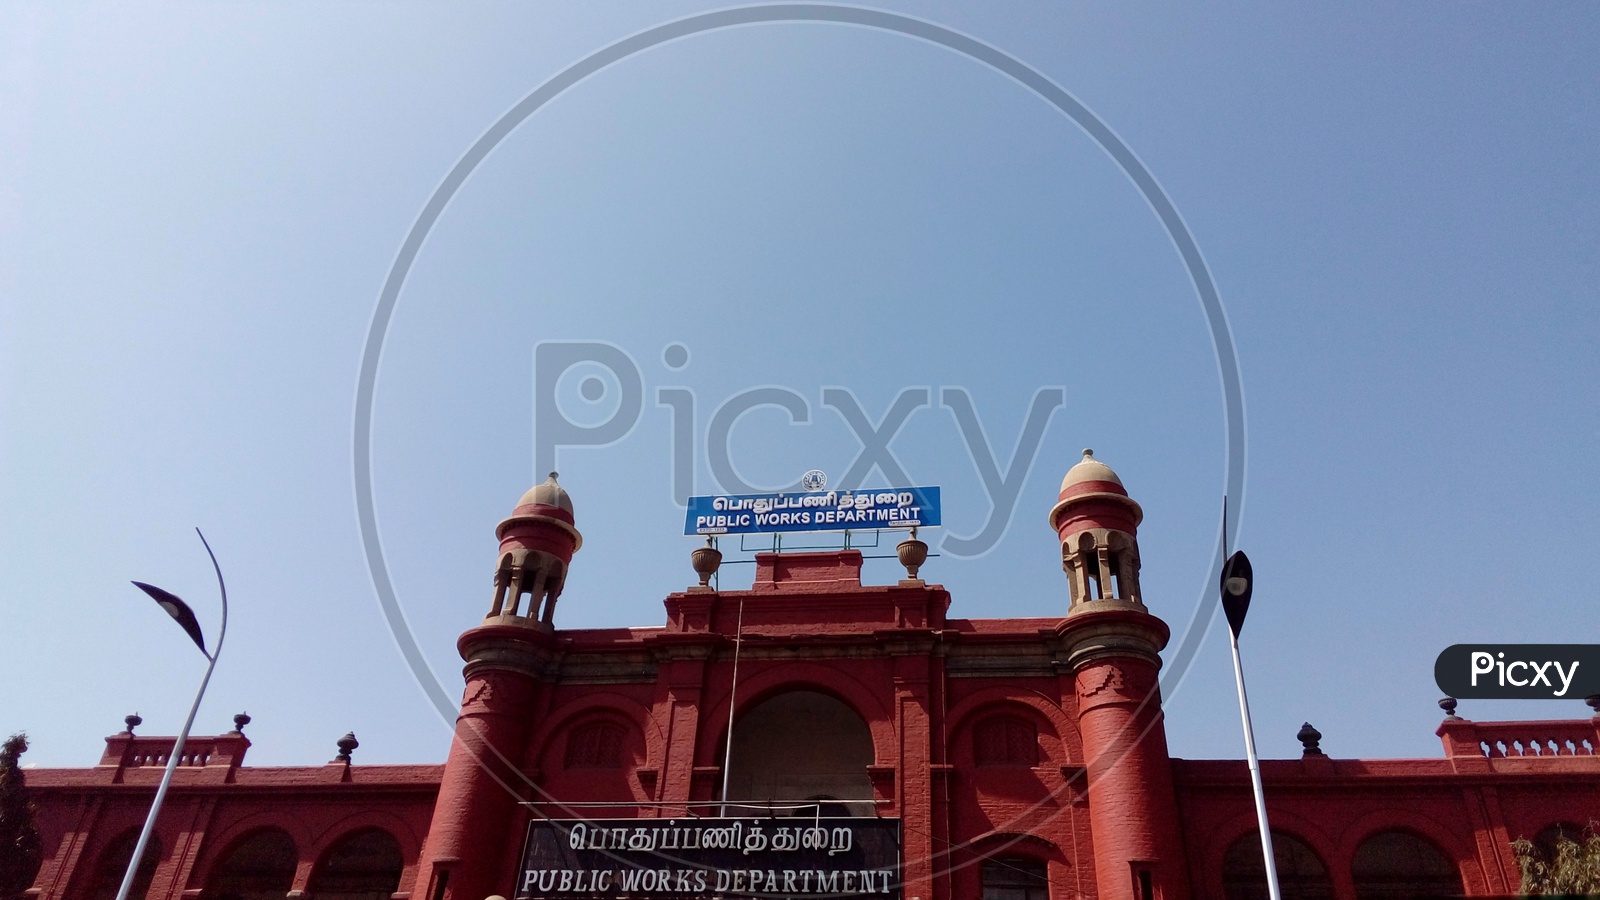 Public Works Department Building  (PWD), Chenani